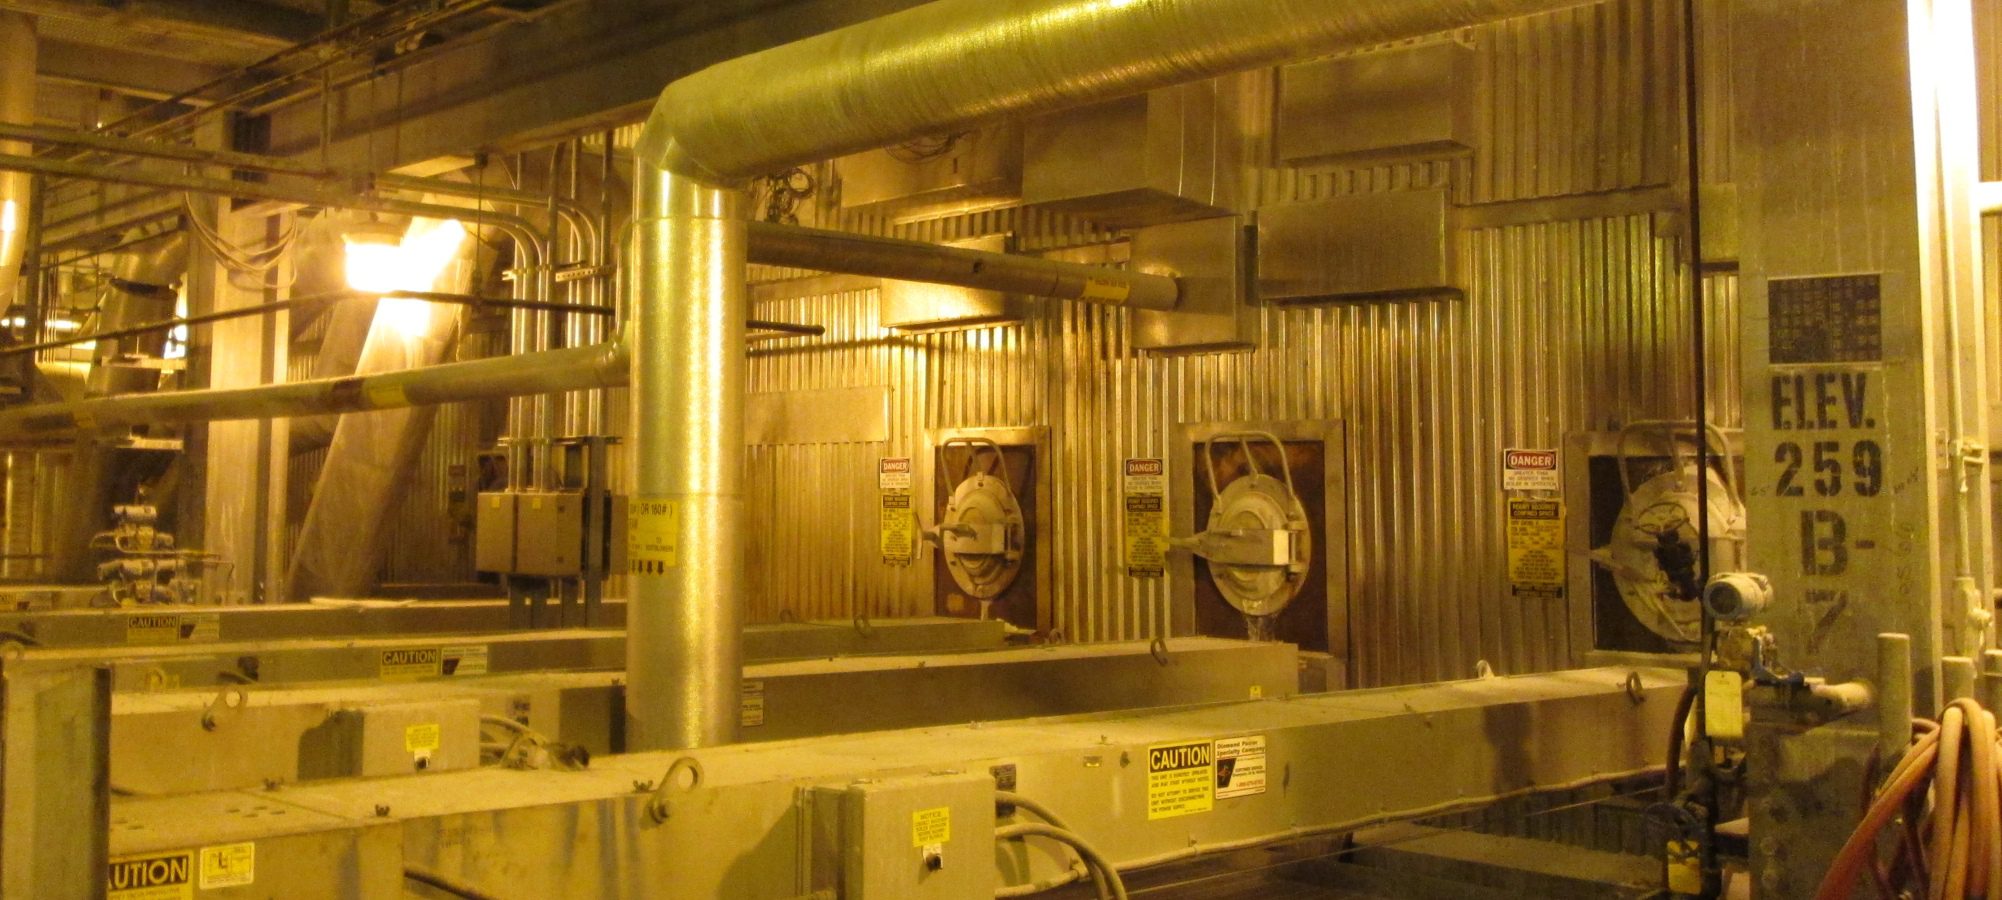 Interior of industrial facility with ducts and vents